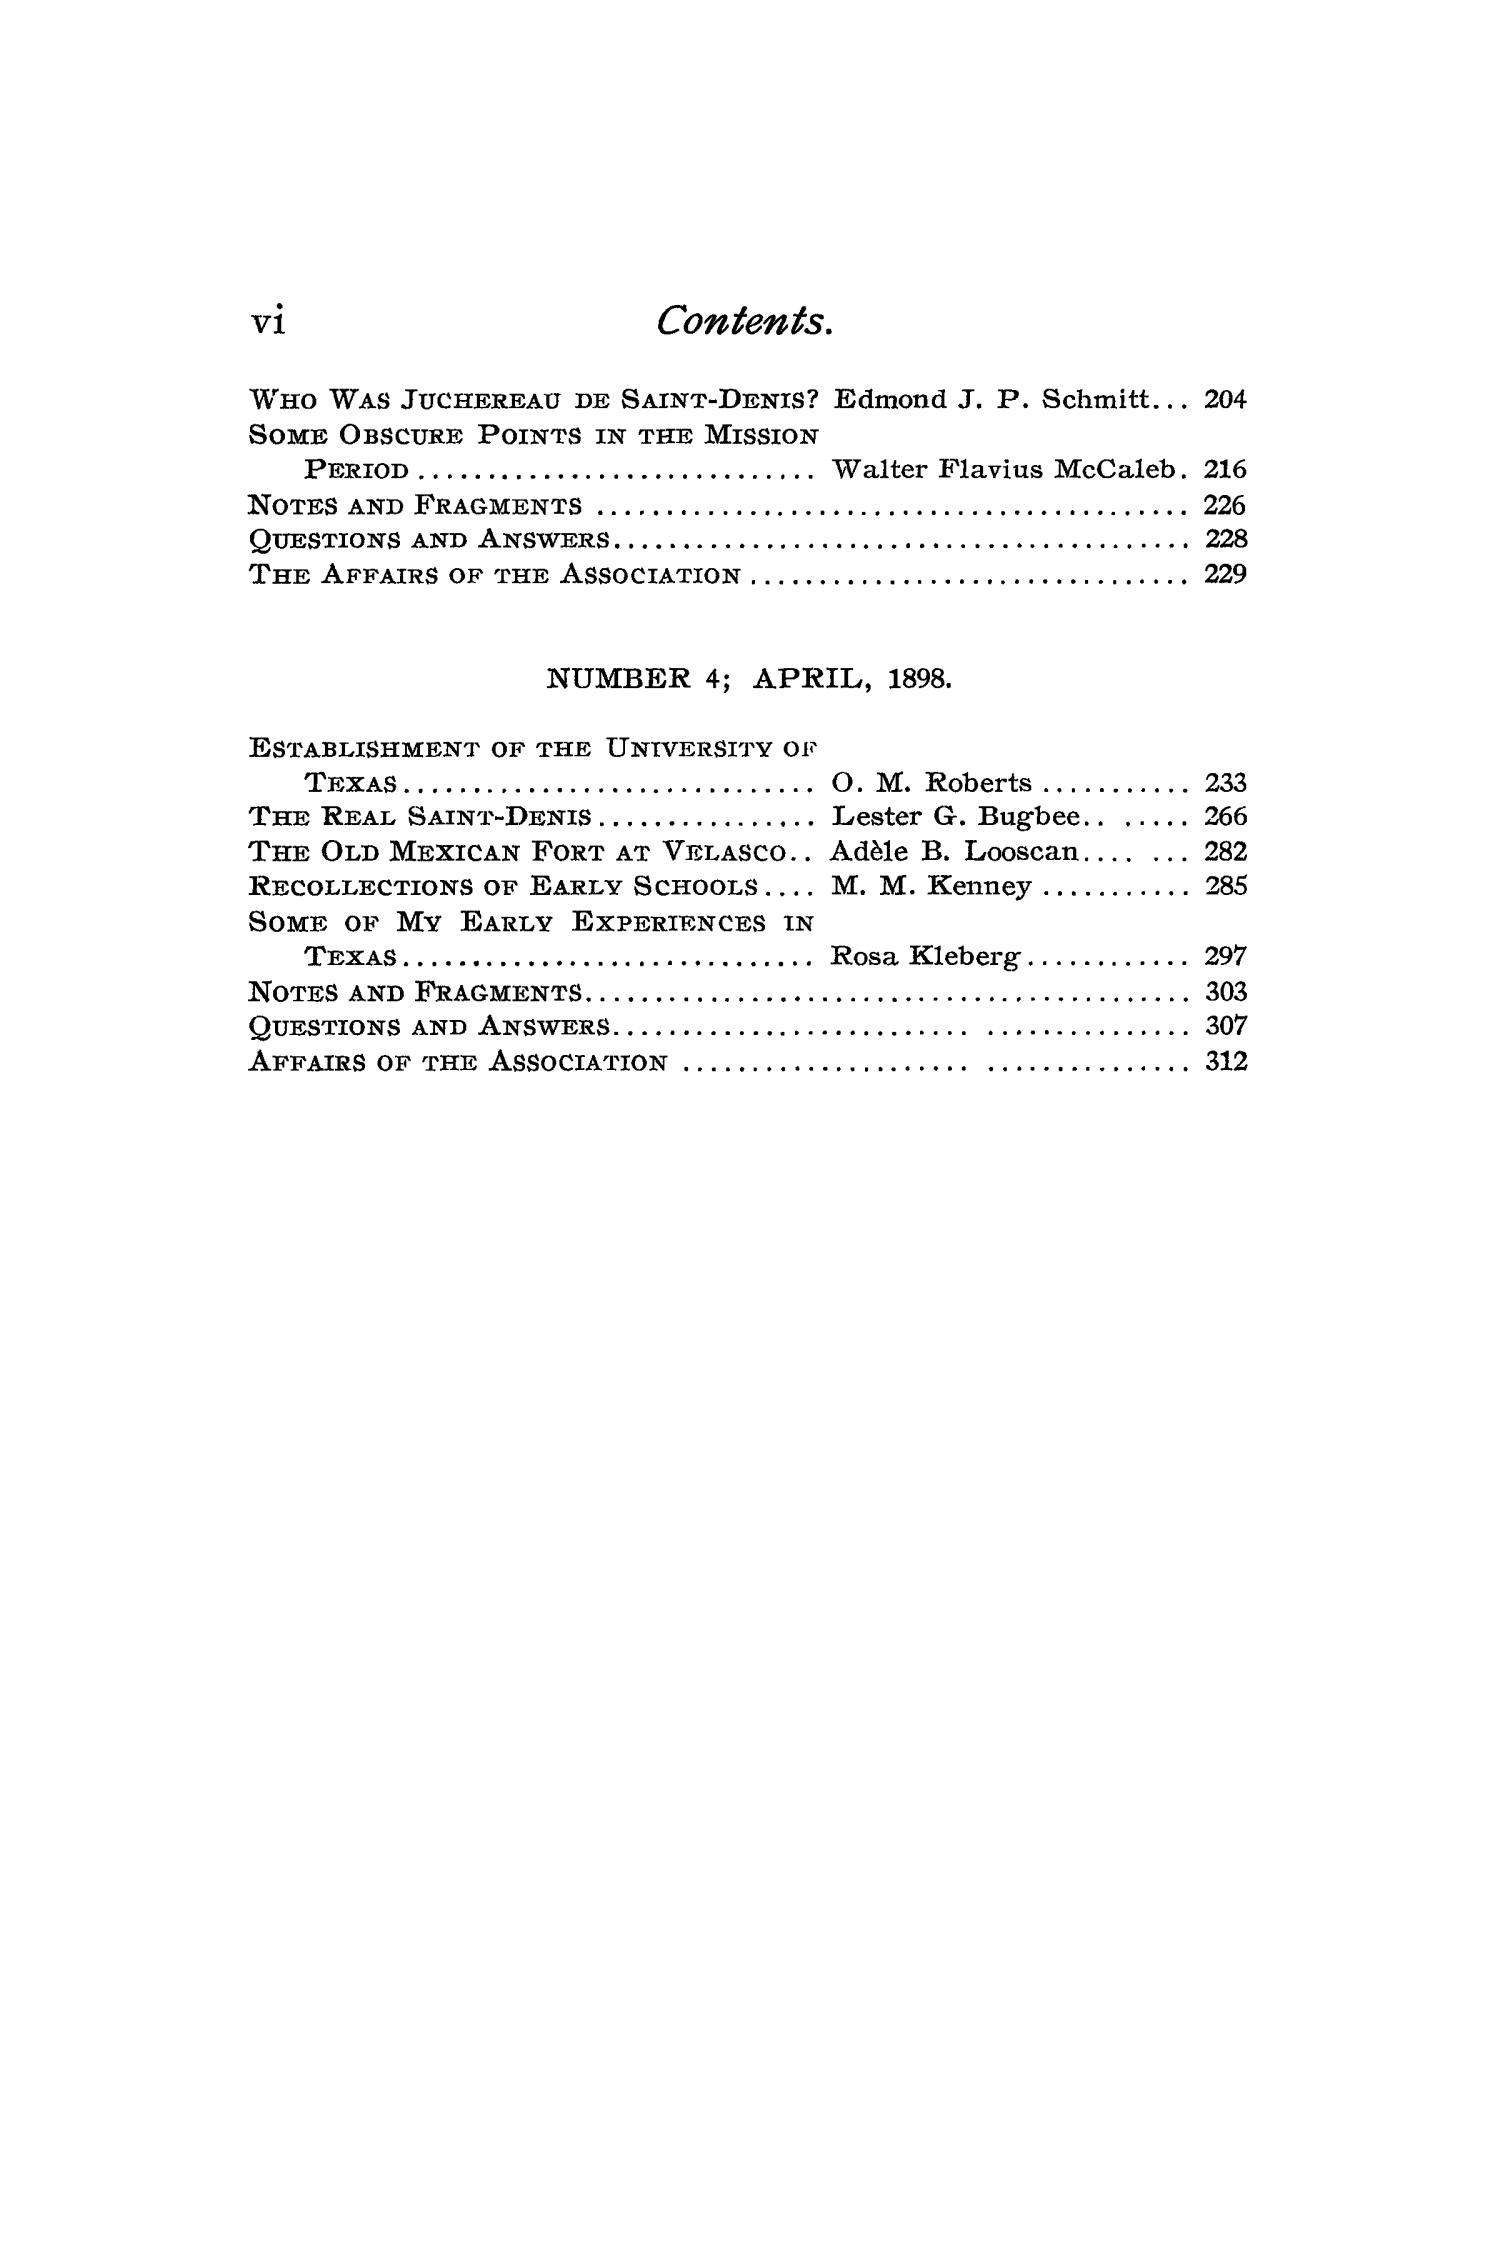 The Quarterly of the Texas State Historical Association, Volume 1, July 1897 - April, 1898
                                                
                                                    vi
                                                